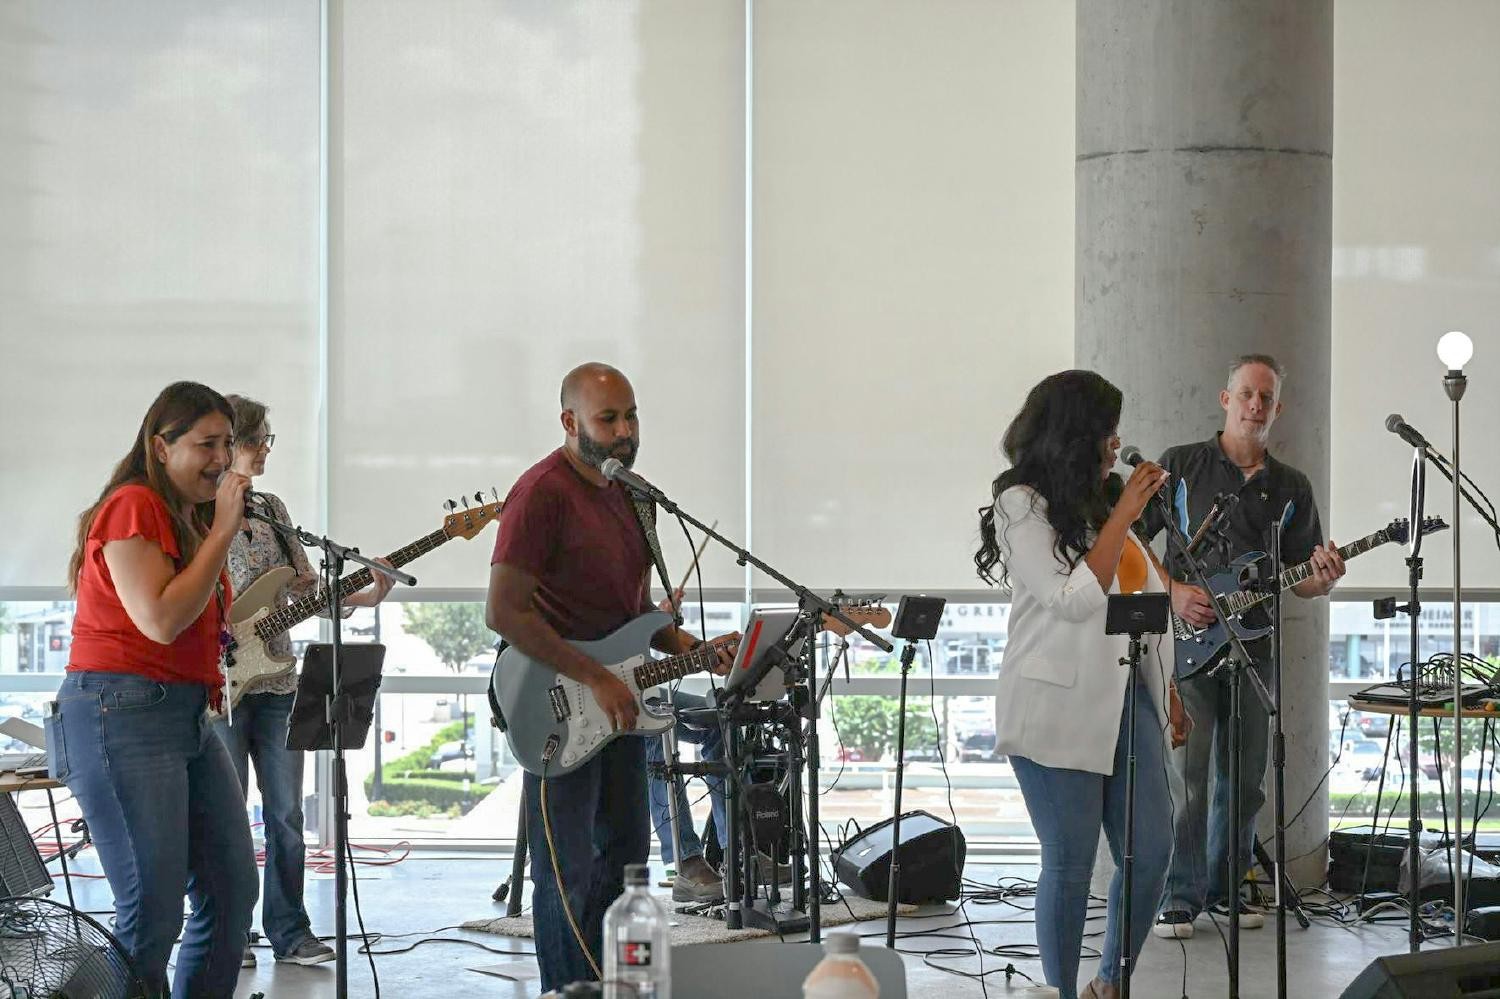 ERGs, interns, & a live-stream audience enjoyed a Summer Sound Session led by our all-employee band, The Profit.